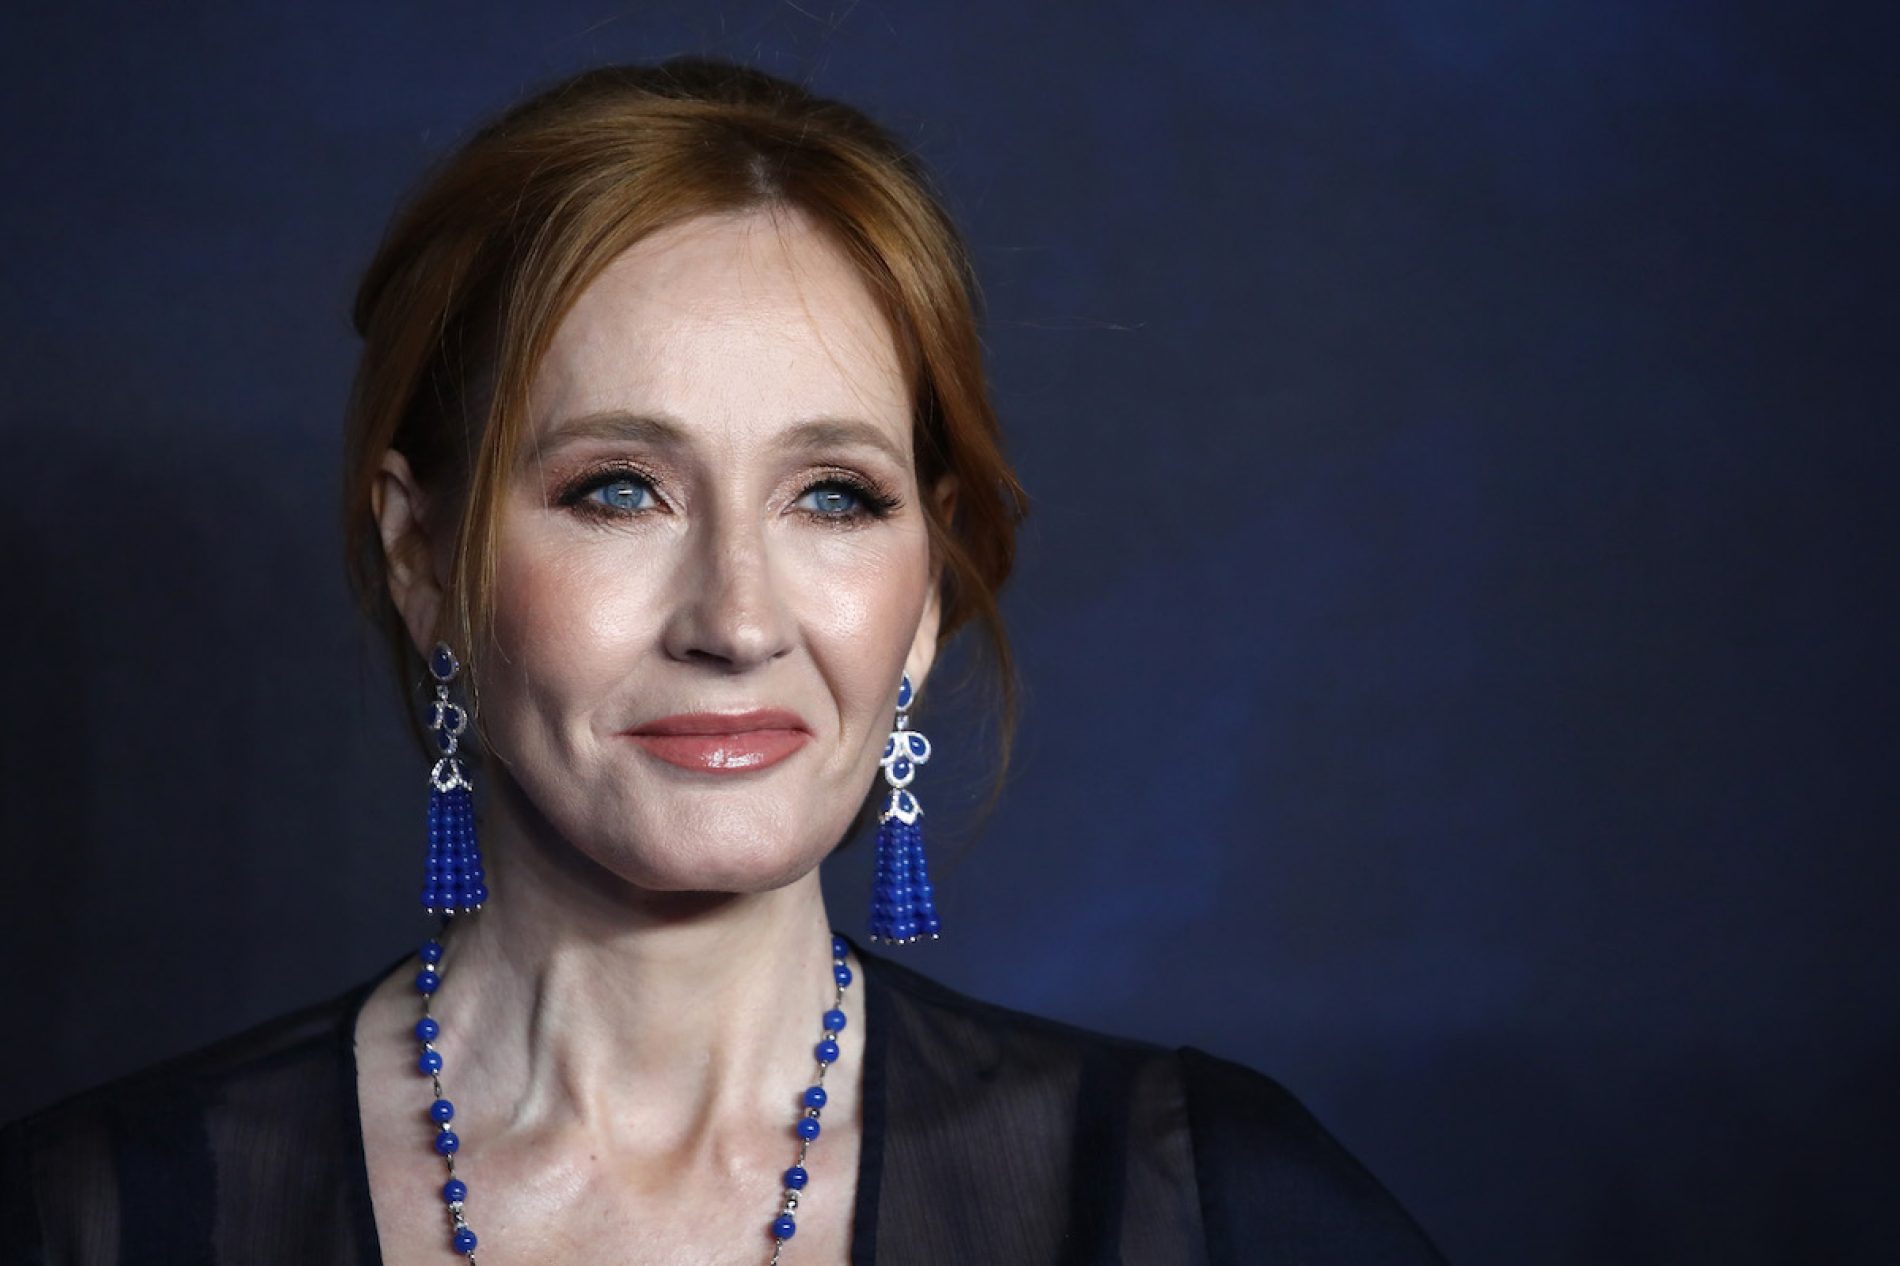 Opinion: J.K. Rowling Is Taking Heat From the LGBT Left. And The Reason Should Concern Us All